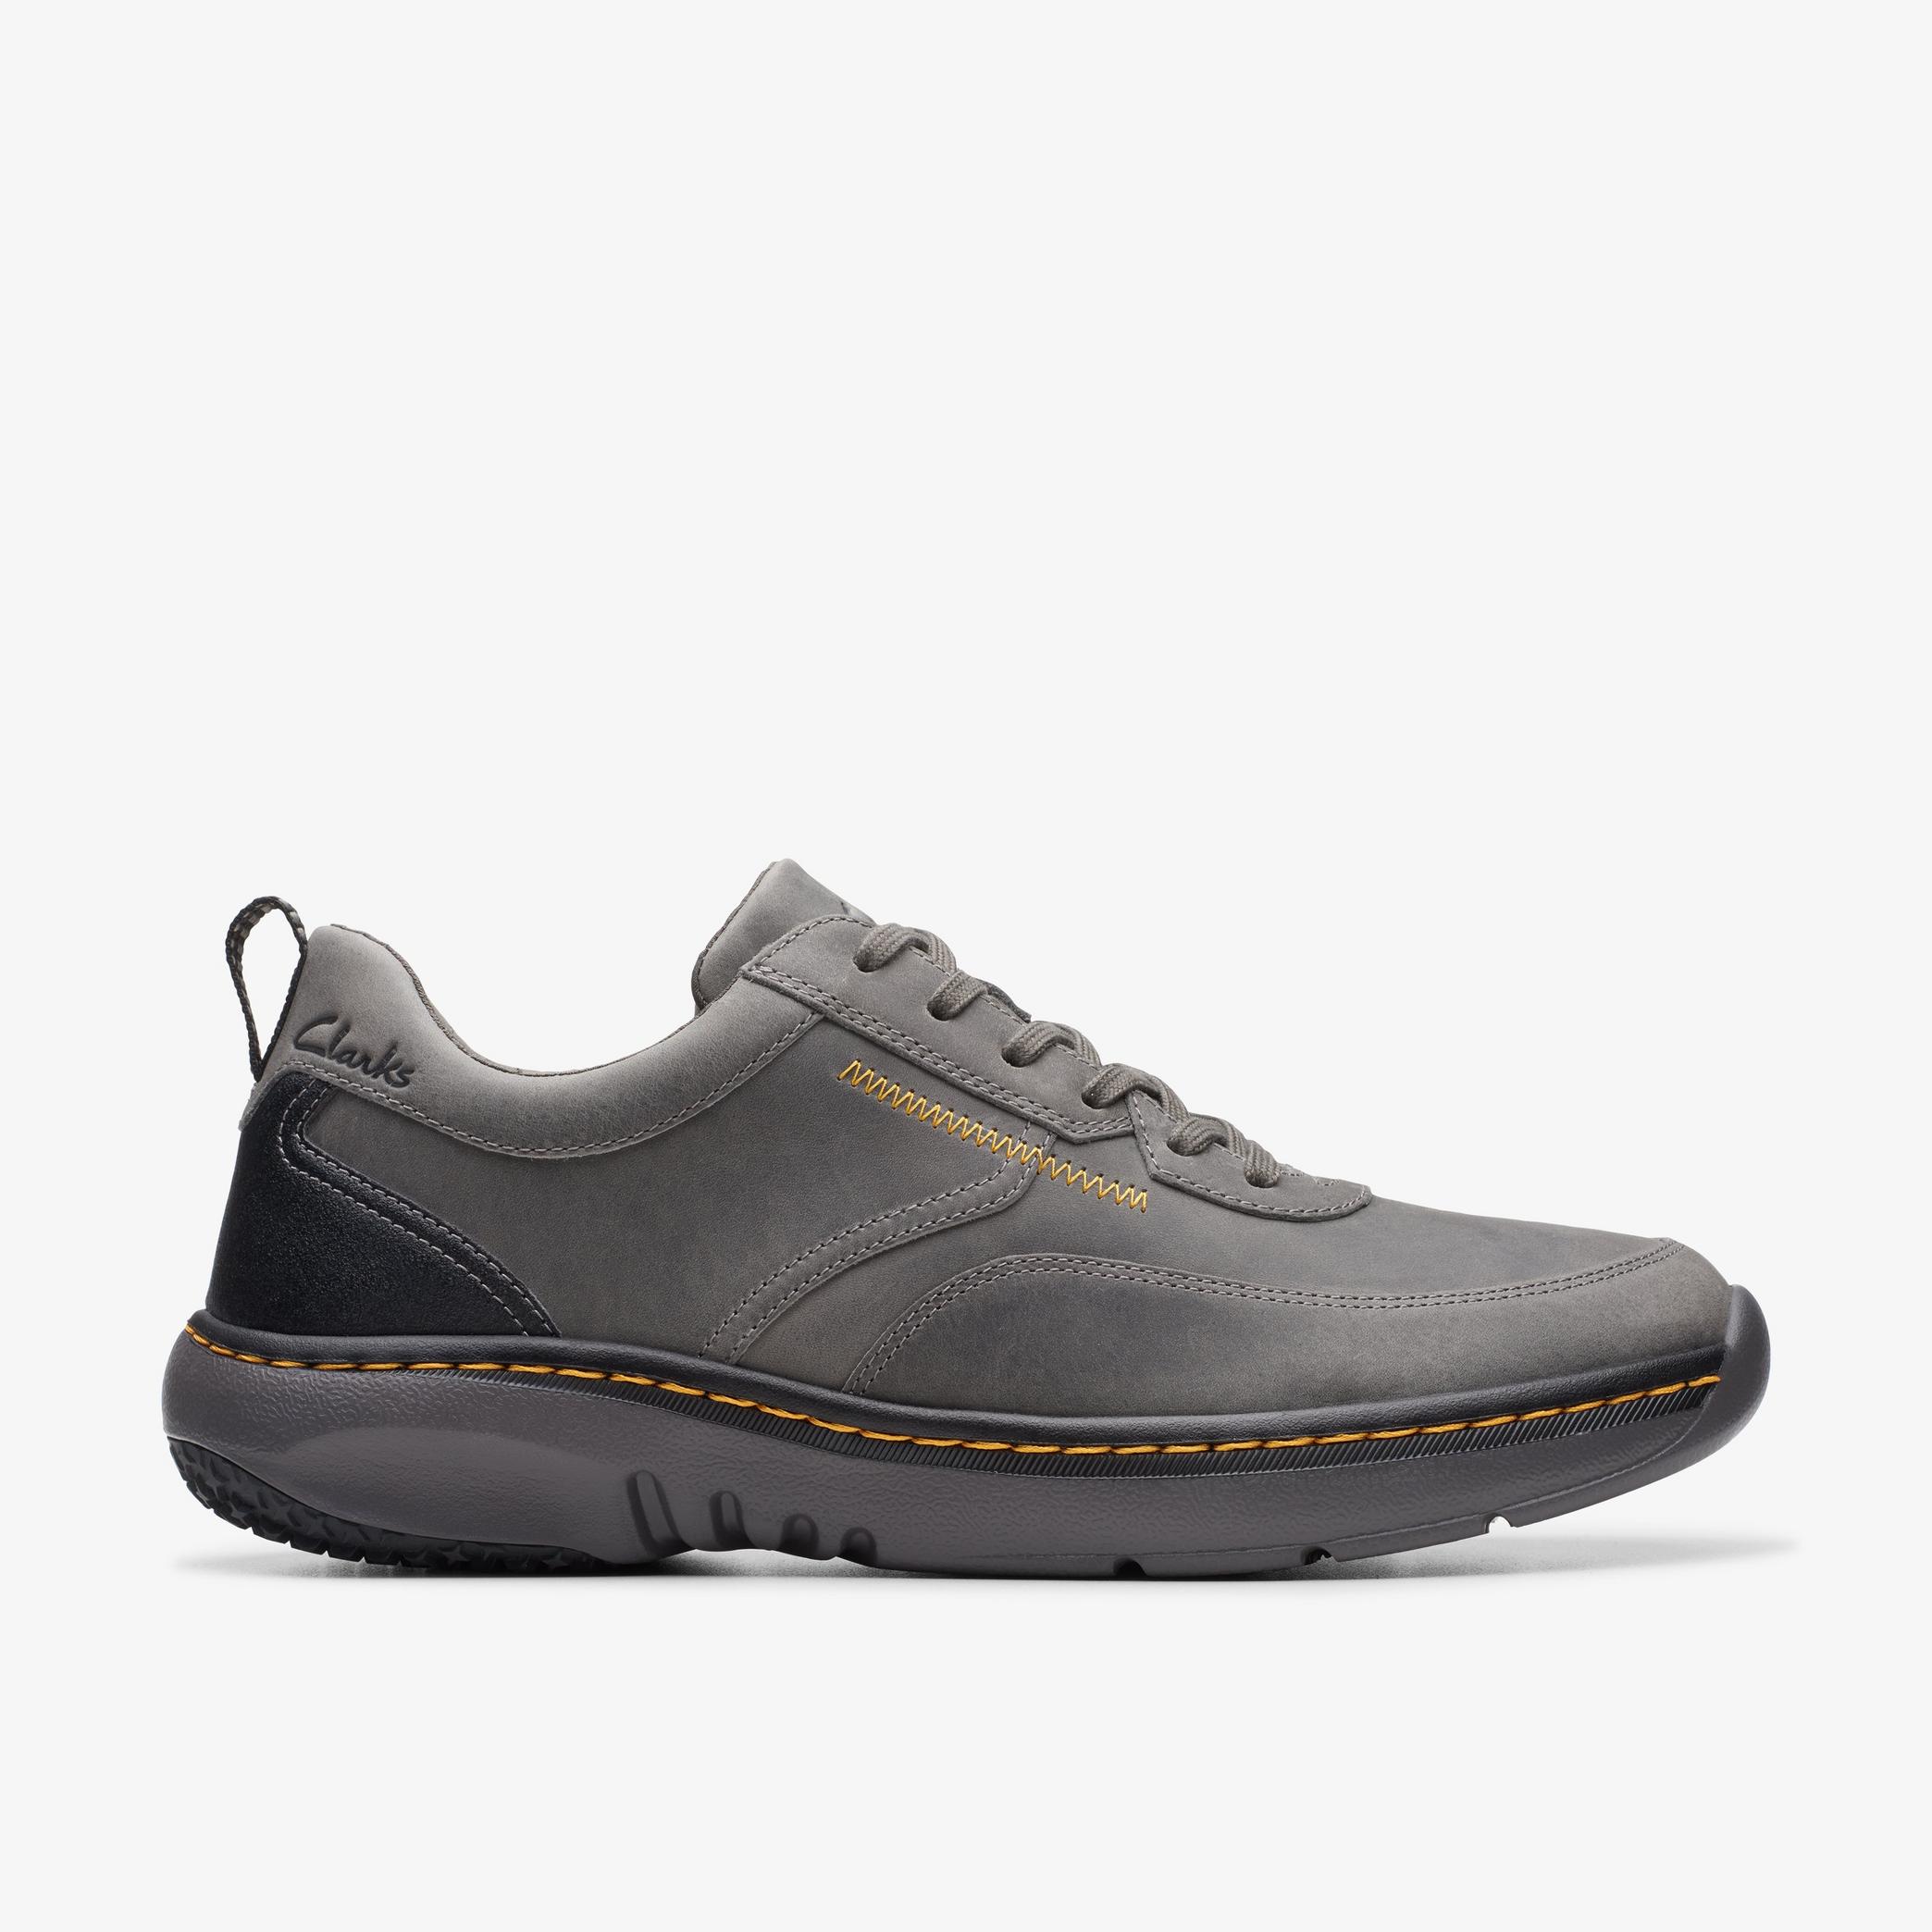 Clarks Pro Lace Dark Grey Leather Trainers, view 1 of 6